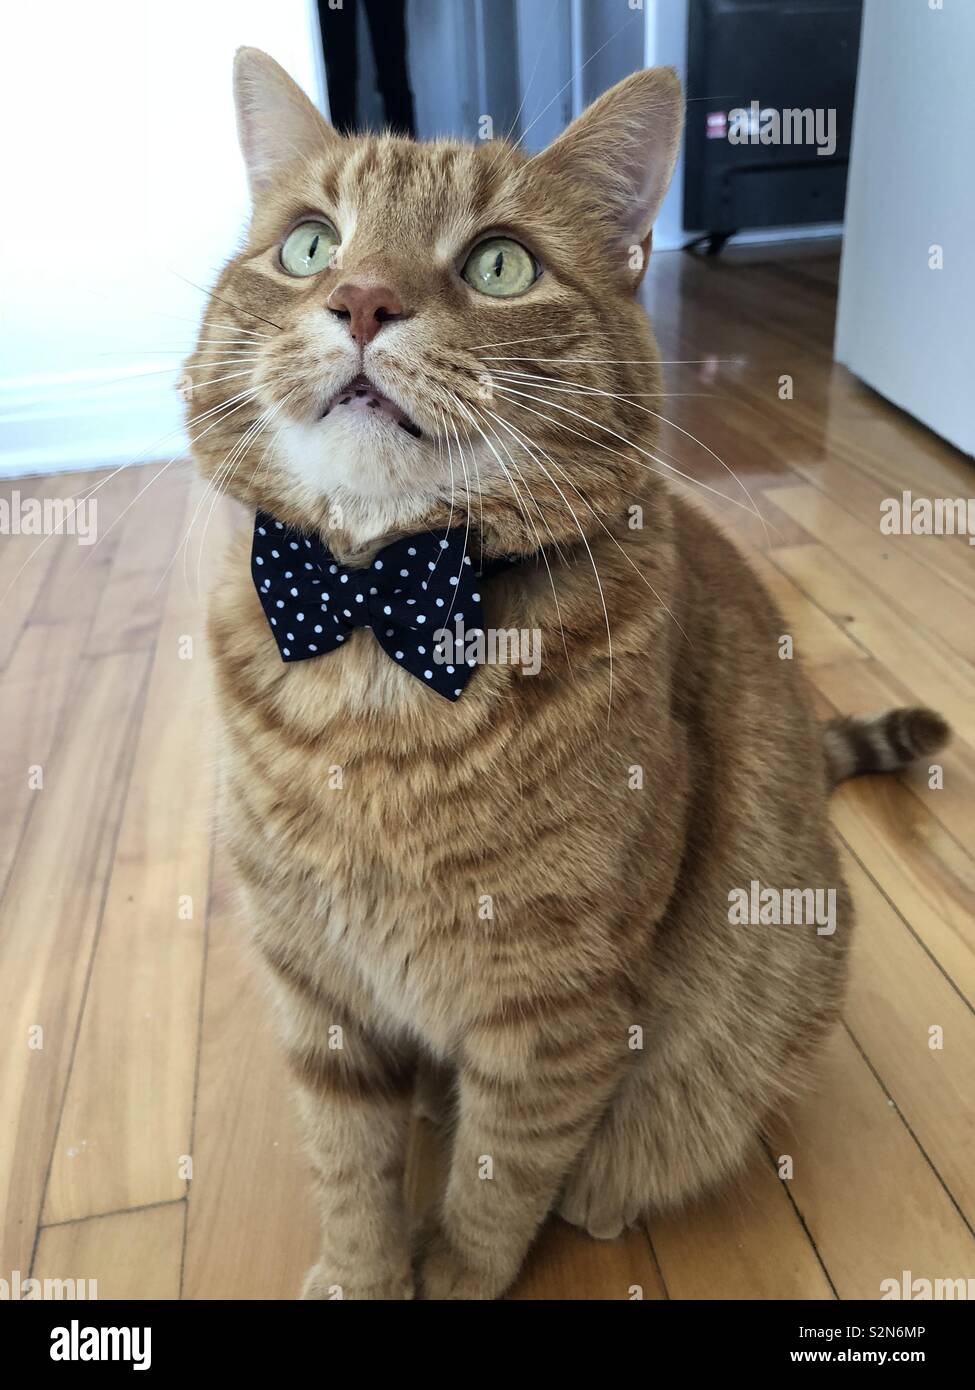 Orange cat wearing a white polka dot blue bow looking up on a 